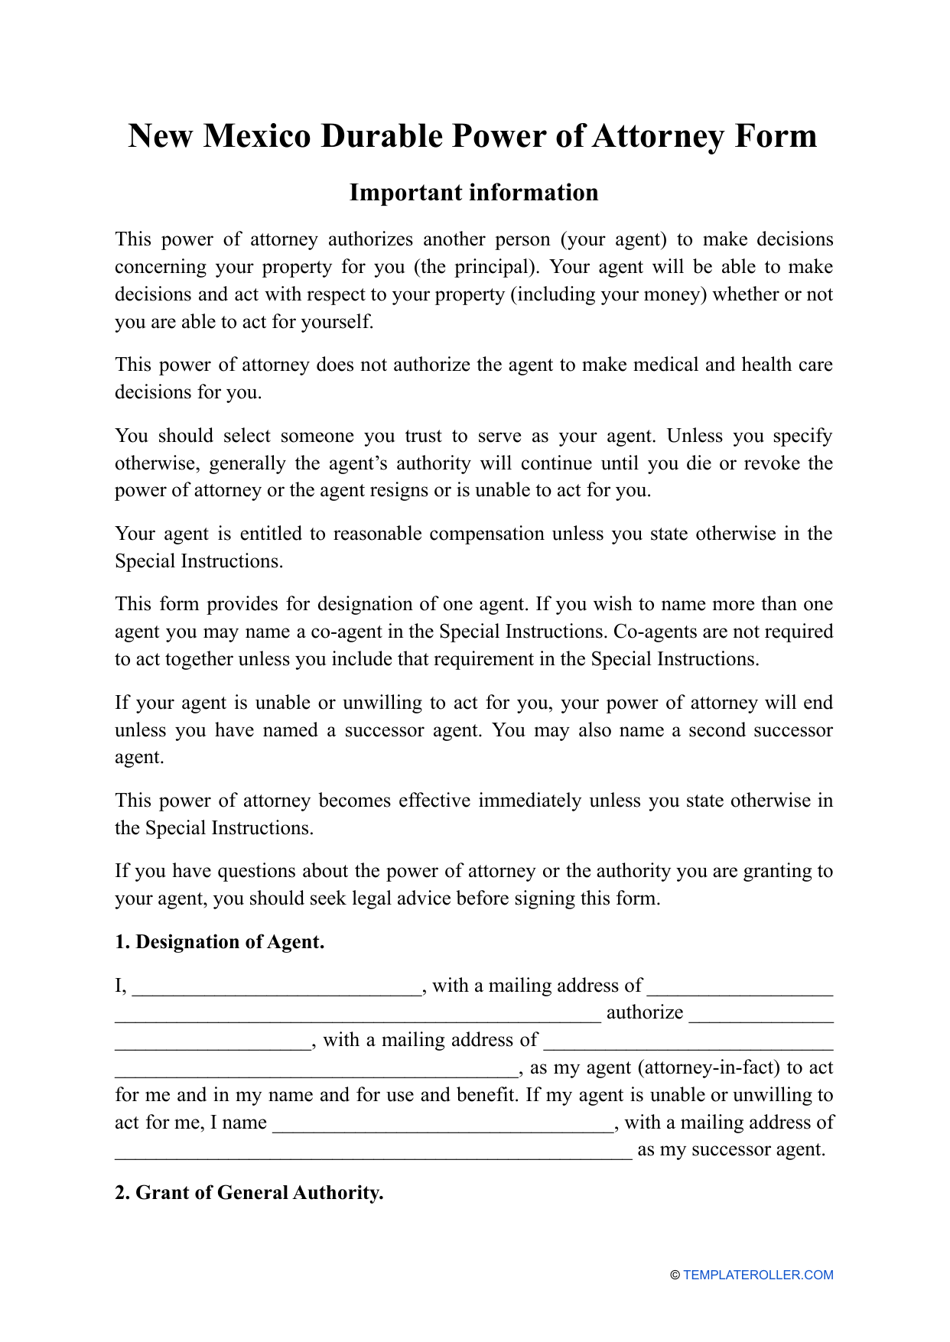 Durable Power of Attorney Form - New Mexico, Page 1